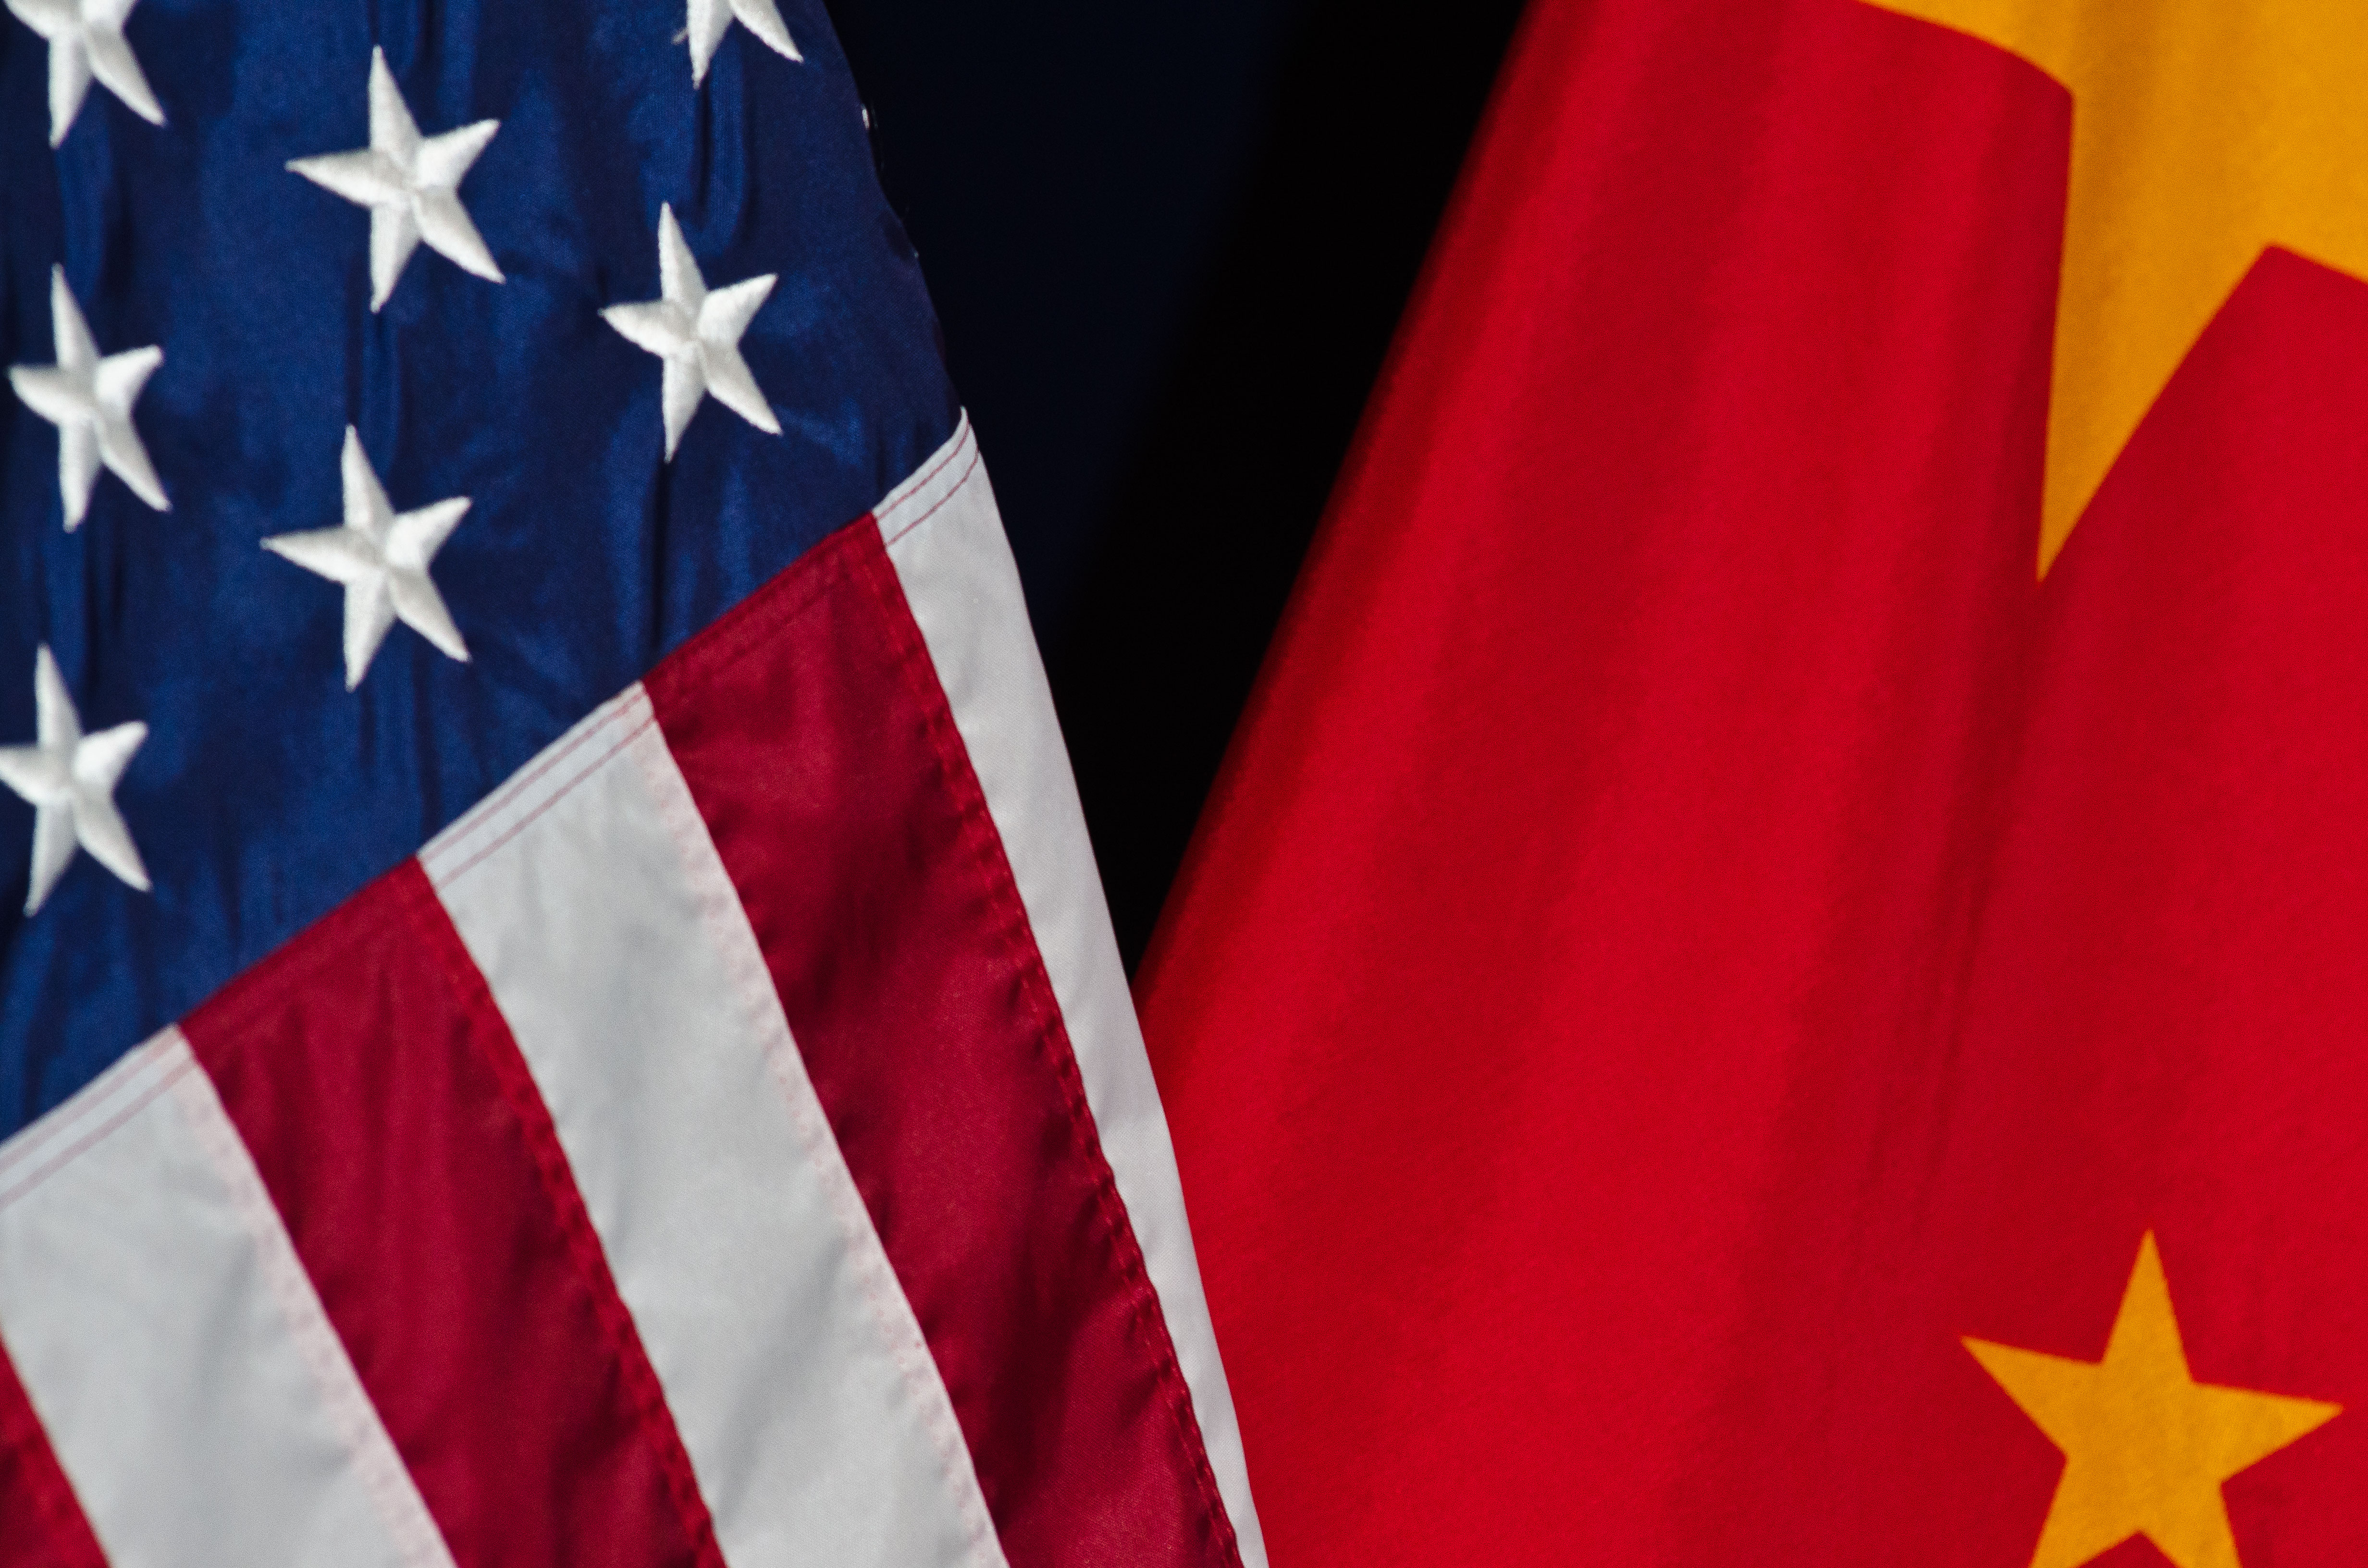 The flags of the United States and China